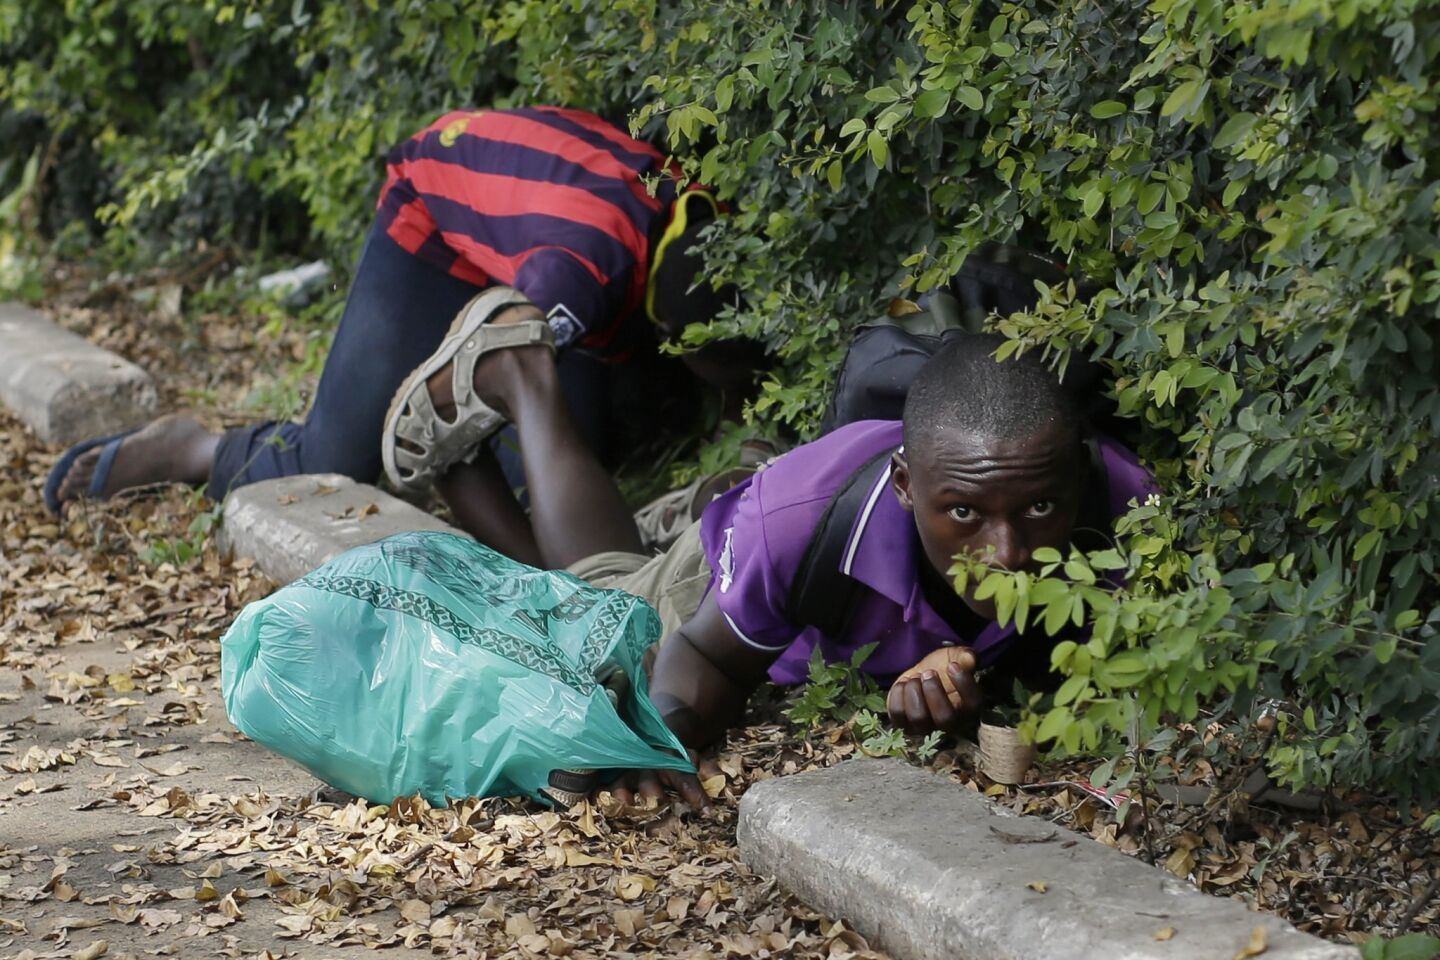 Men duck for cover as shots are fired May 4 in Bujumbura.